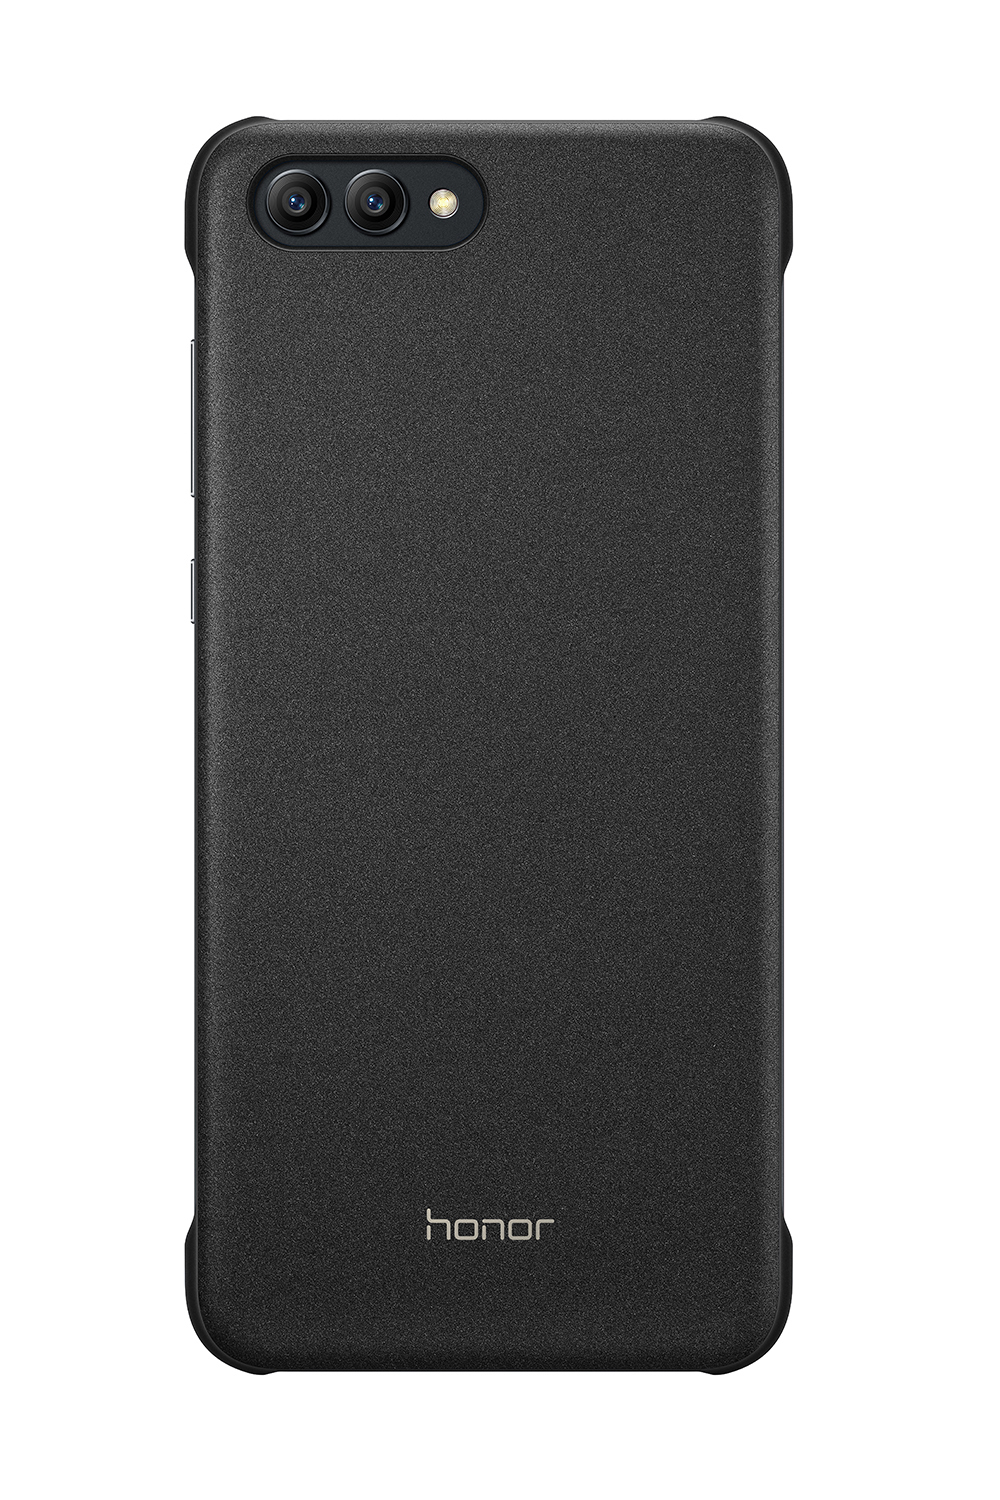 Honor, Backcover, Schwarz View PU Magnet, 10, HONOR